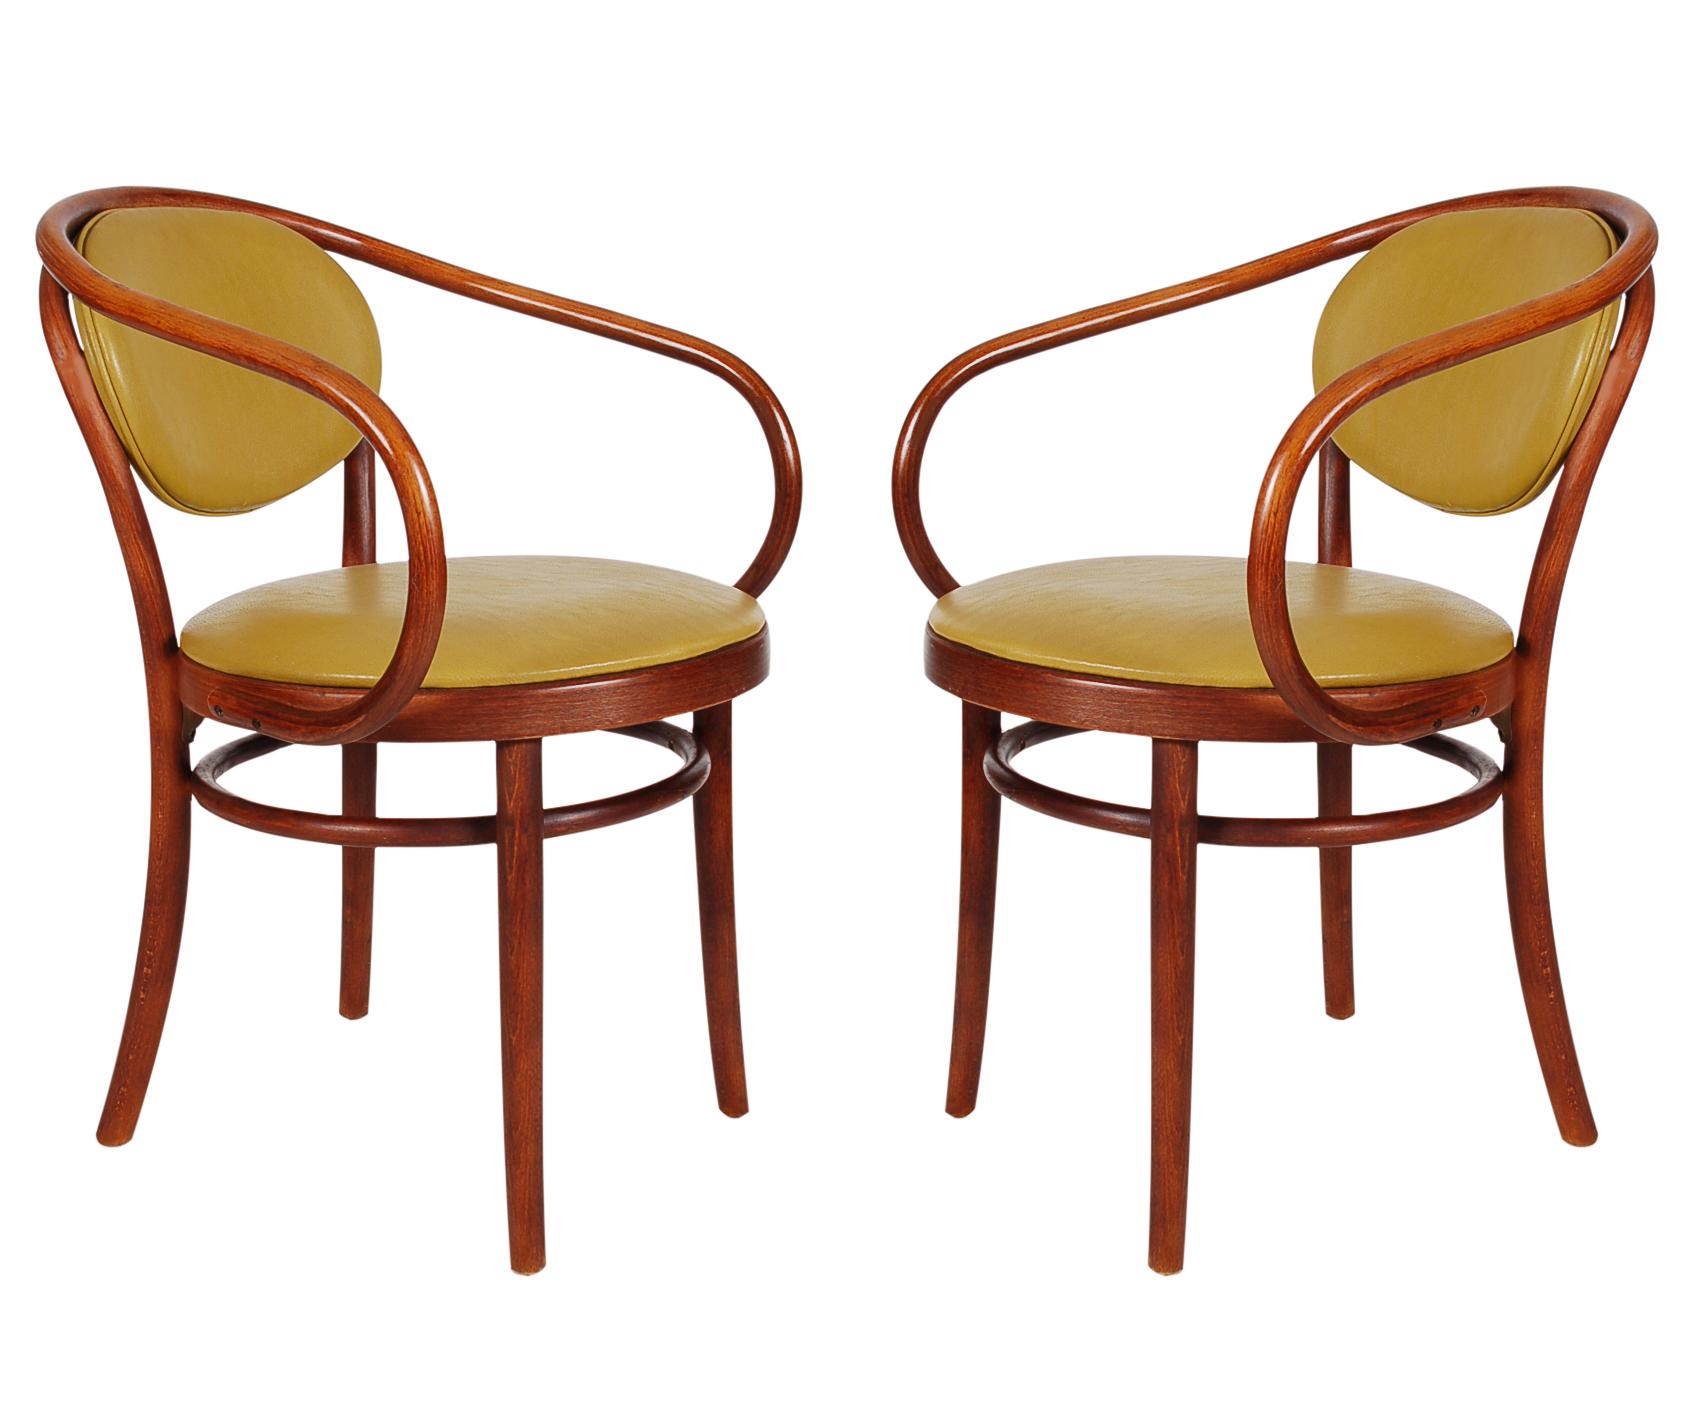 Mid-20th Century Mid-Century Modern Bent Wood B9 Armchair Dining Chairs by Le Corbusier / Thonet